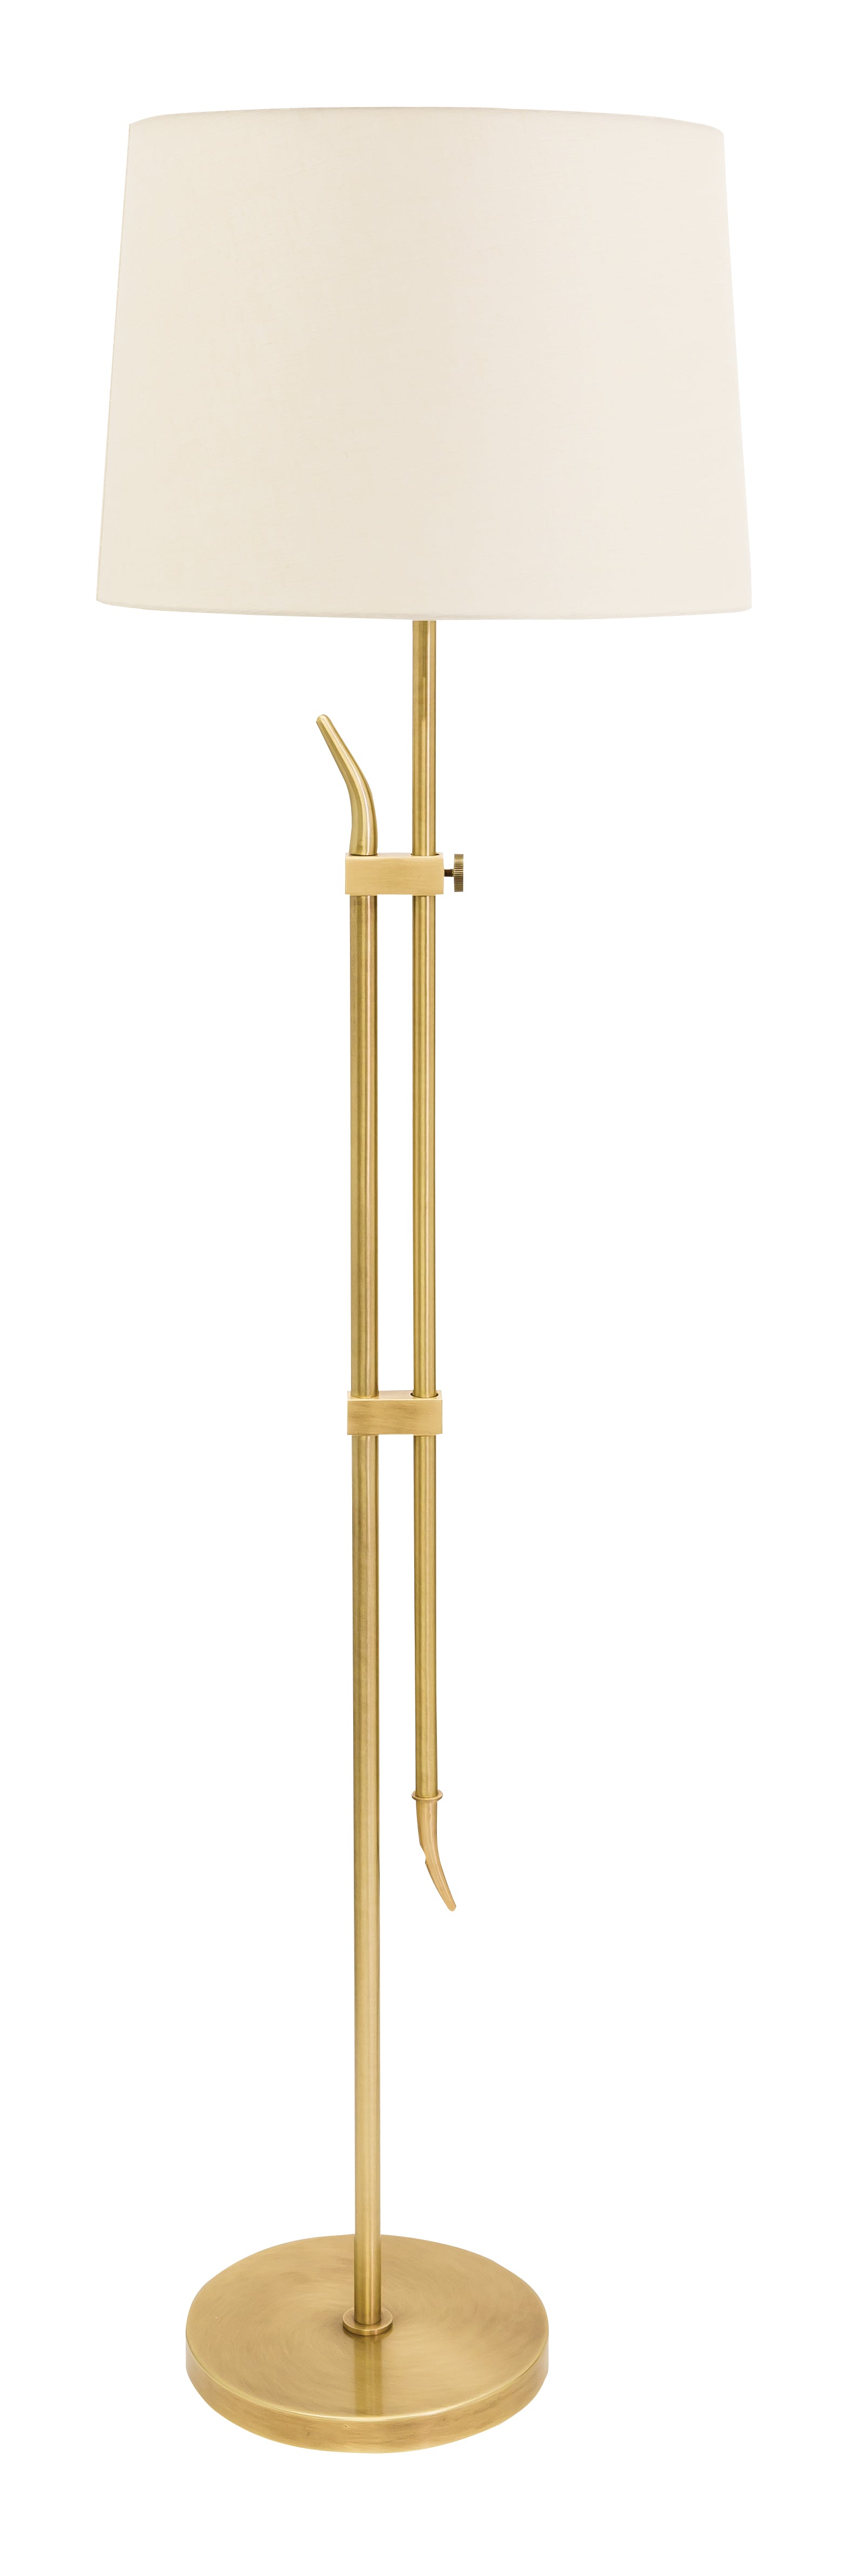 House of Troy 61" Windsor Adjustable Floor Lamp in Antique Brass W400-AB